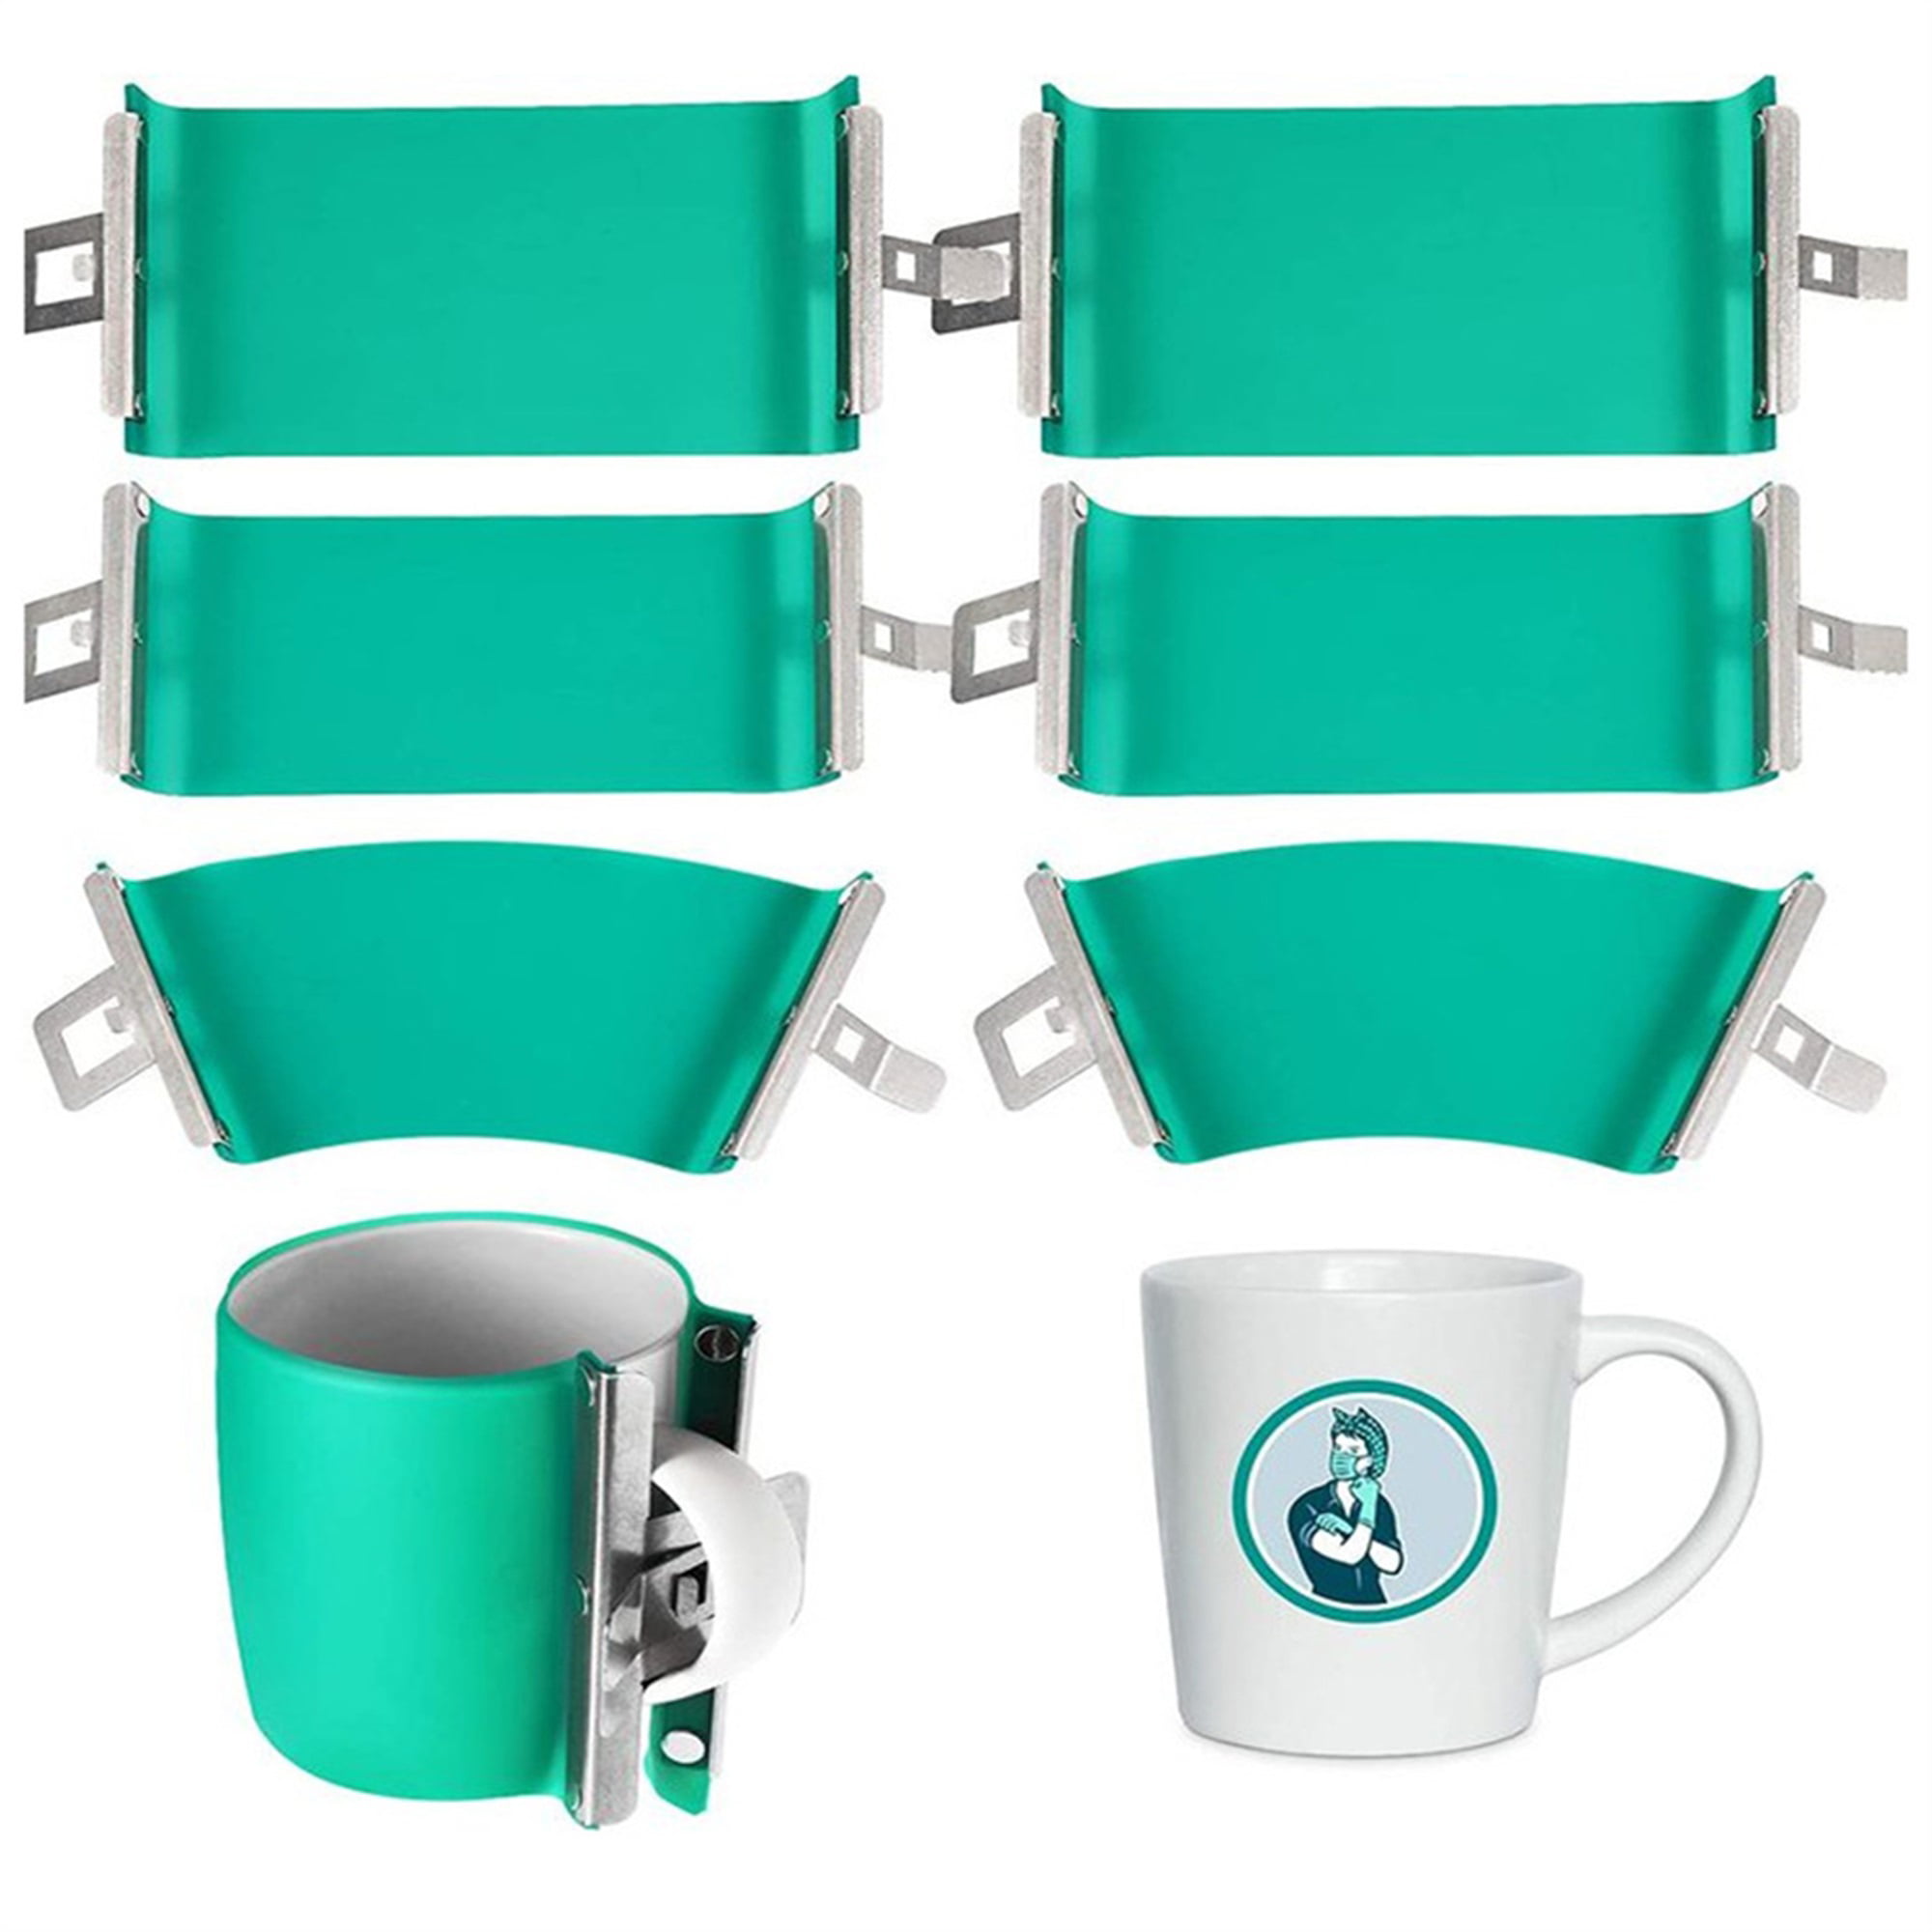 5 PACK 11OZ Sublimation Silicone Mug Wrap 11OZ Cup Clamp Fixture for Printing 